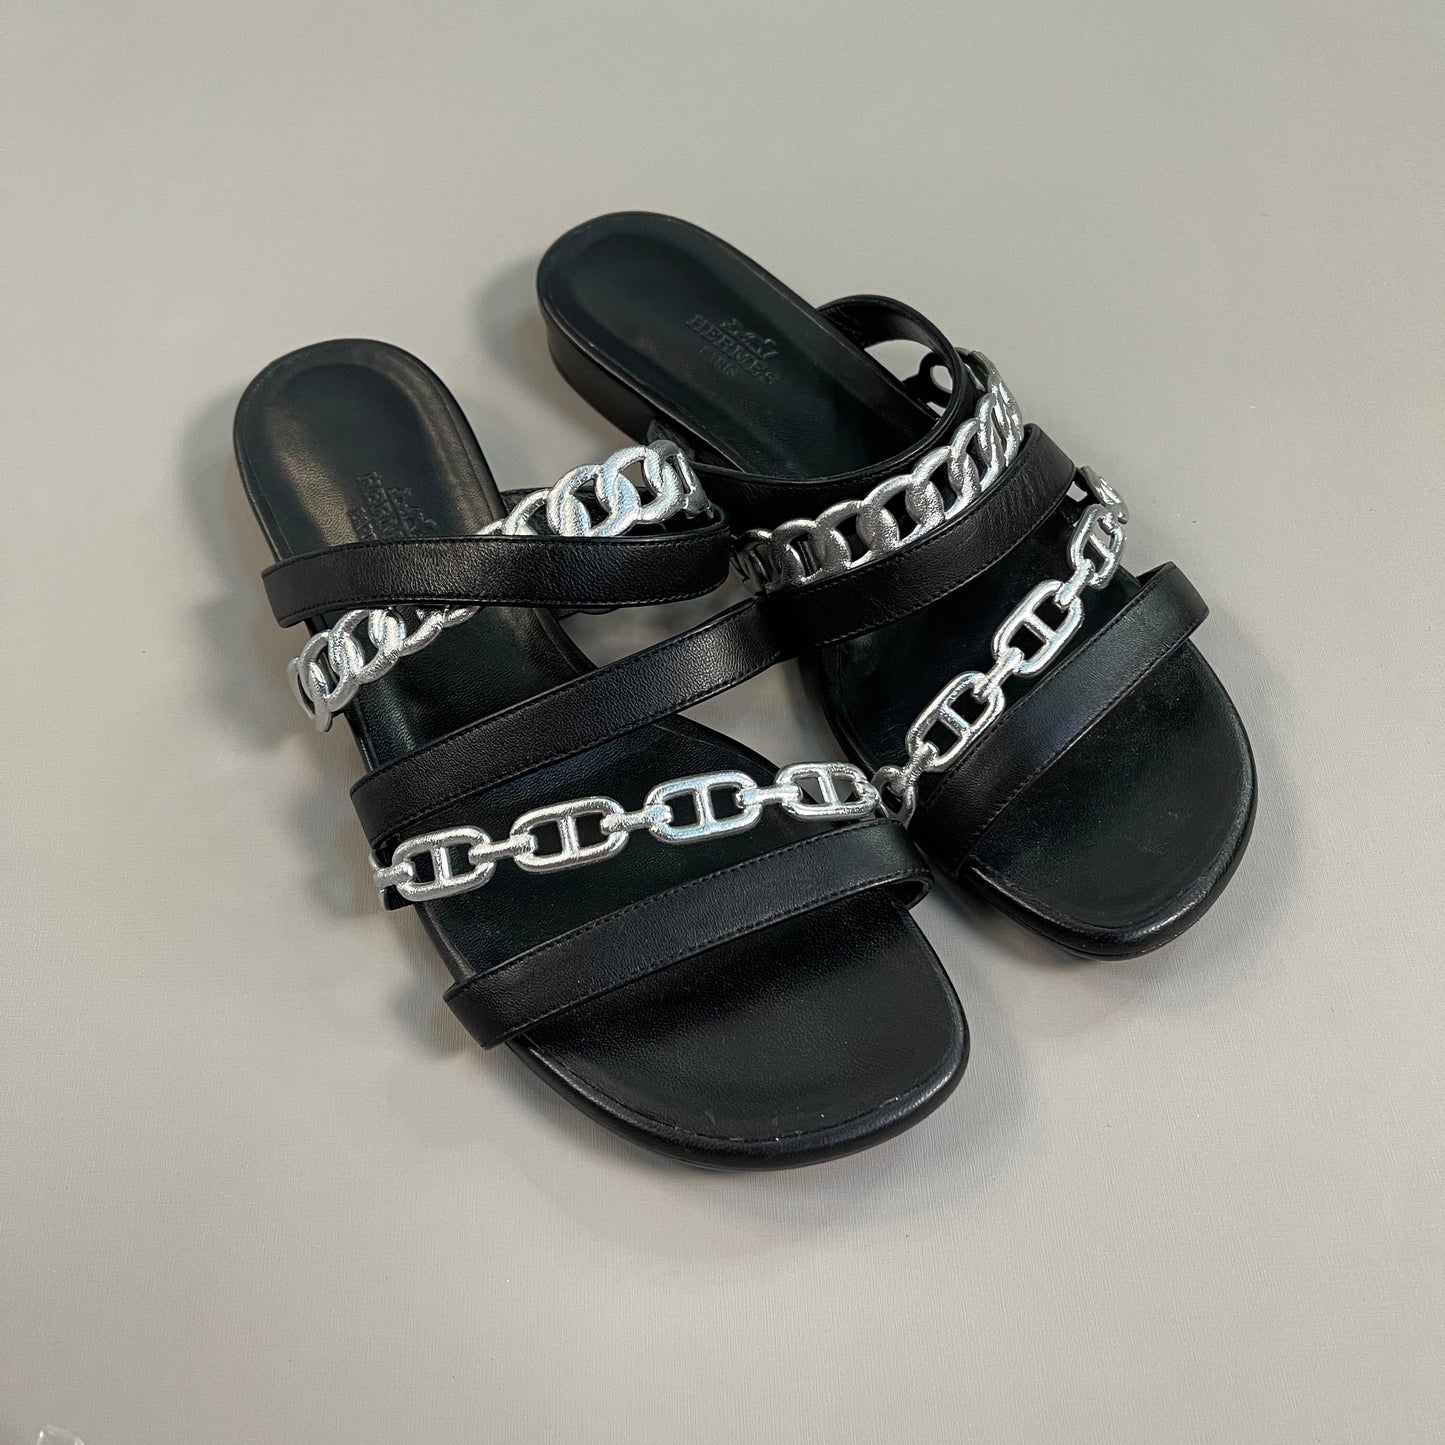 HERMES Leather Chaine d'Ancre Sandals Women's Sz 37 / US ~7 Black / Silver (Pre-Owned)